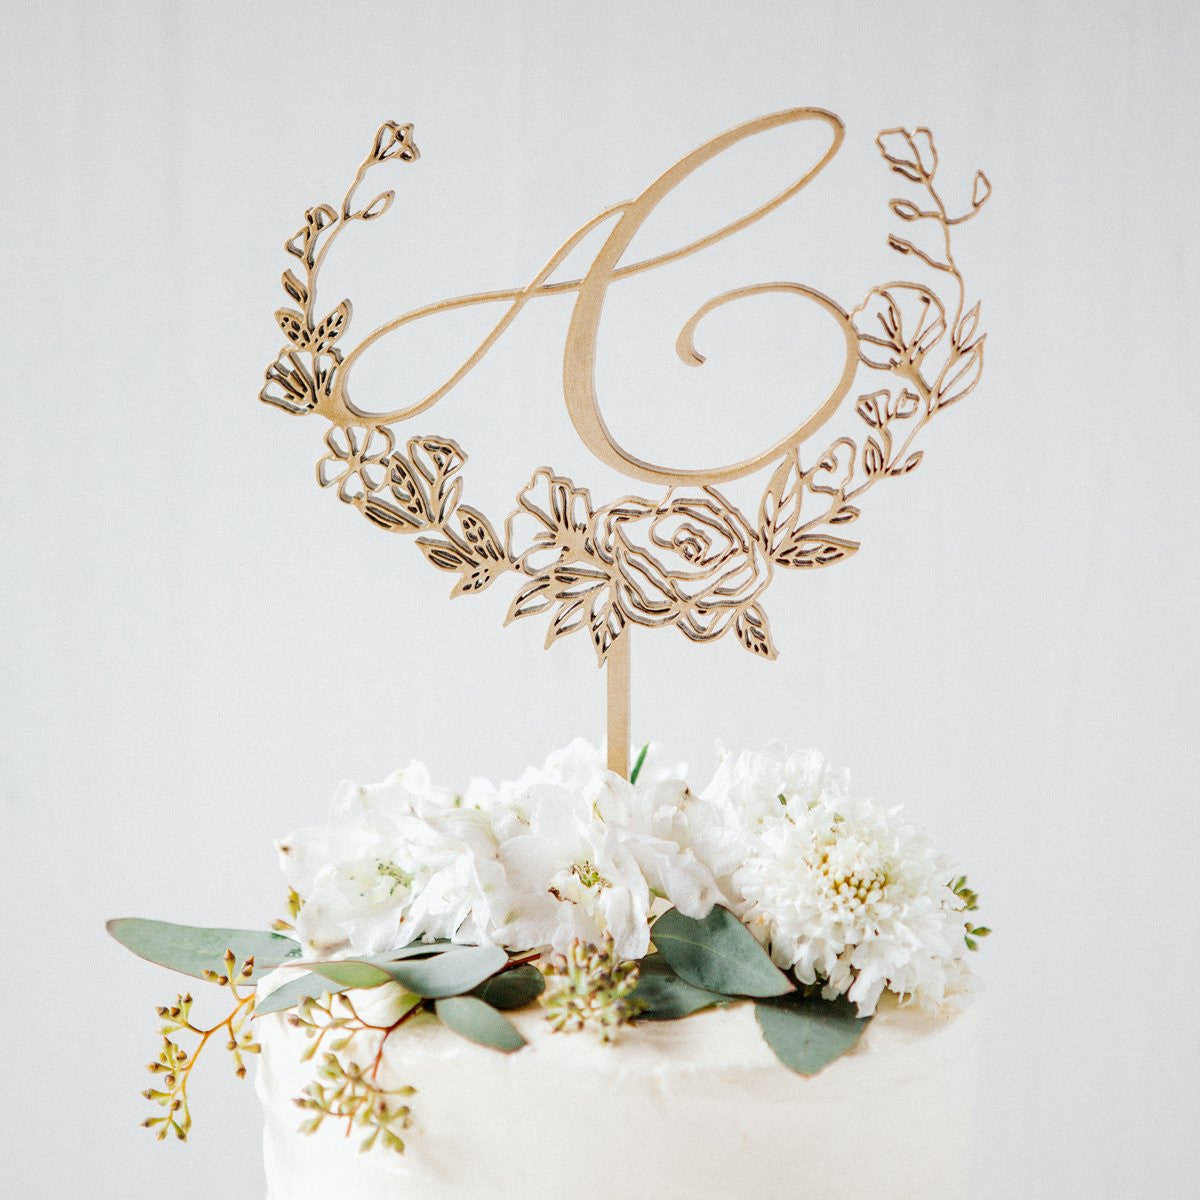 Cake topper personnalisé mariage initial